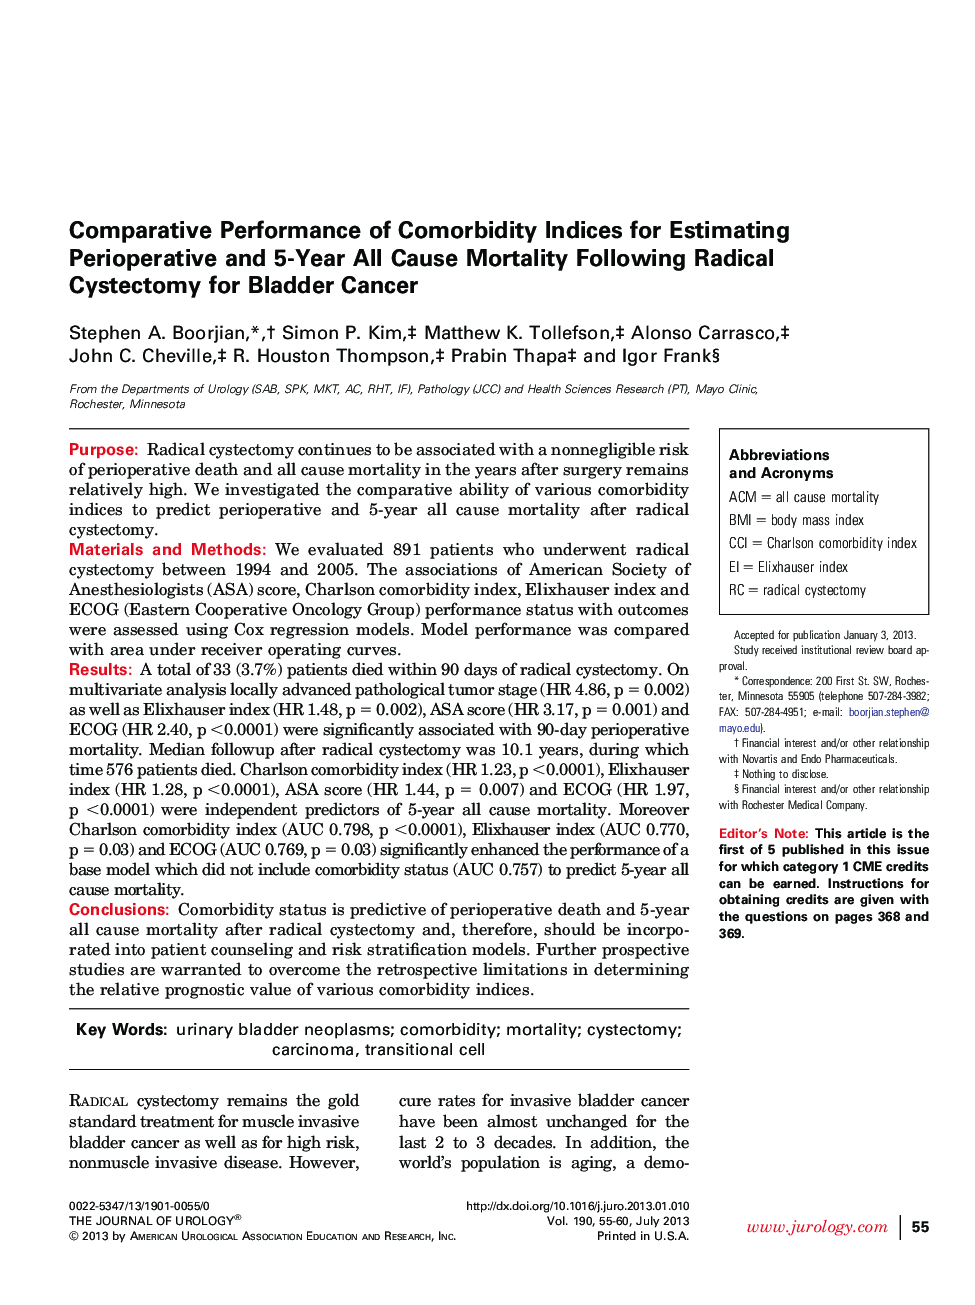 Comparative Performance of Comorbidity Indices for Estimating Perioperative and 5-Year All Cause Mortality Following Radical Cystectomy for Bladder Cancer 